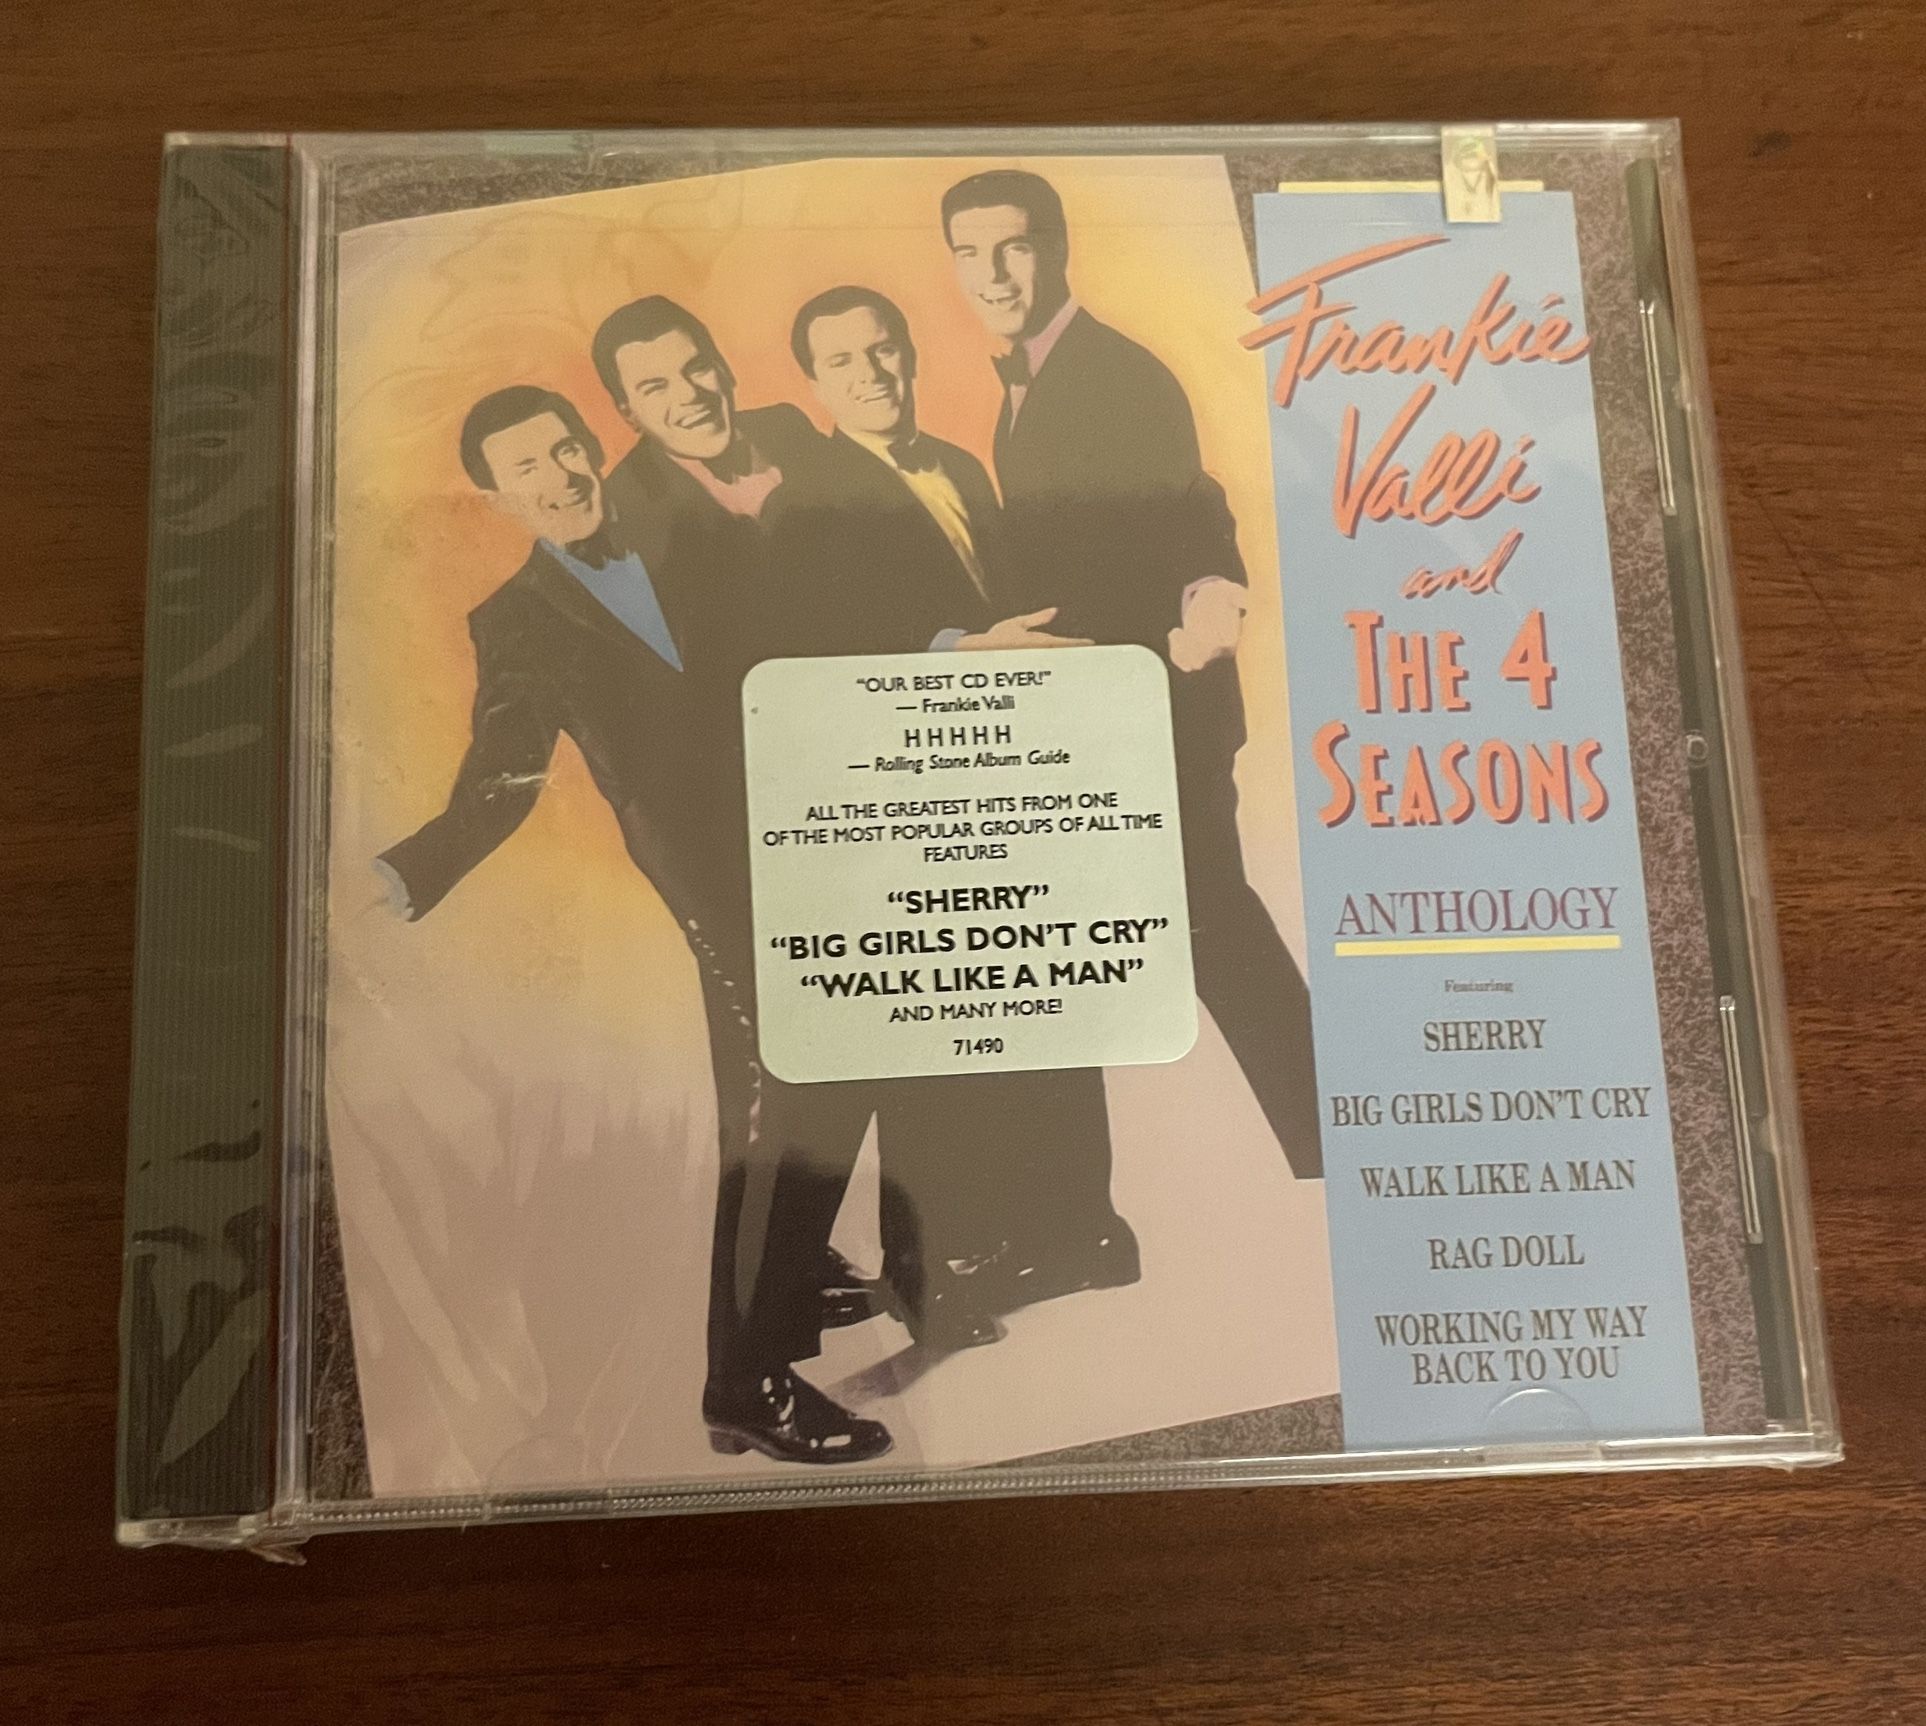 RARE OOP Sealed New Frankie Valli and the Four Seasons Anthology CD sells for $50